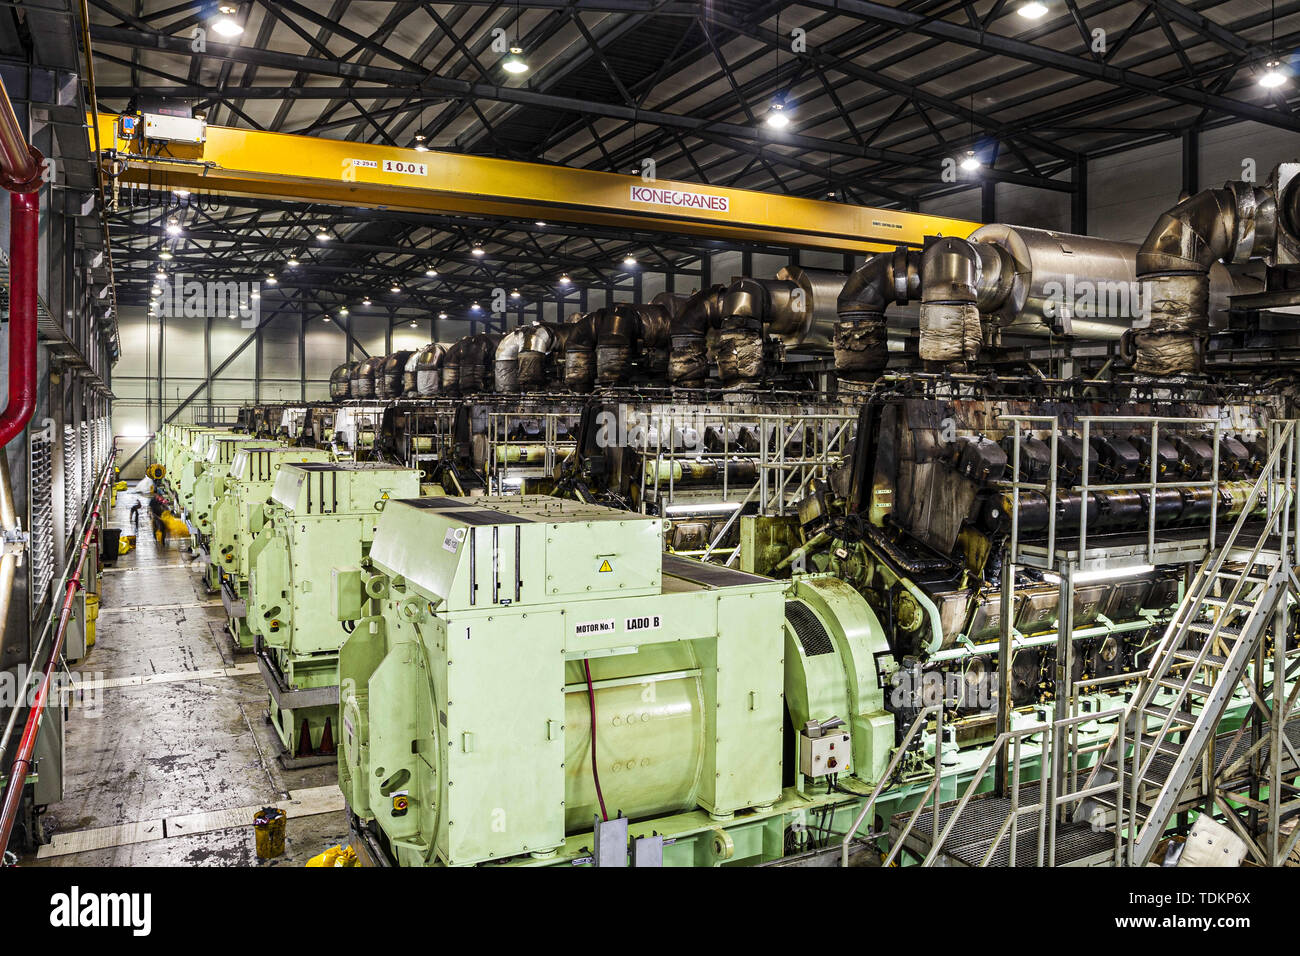 Colon, Panama. 31st Aug, 2011. Machines used for the electricity generation at the Bahia las Minas Thermal Power Plant, a coal-fired thermal power station in Colon. Credit: Ricardo Ribas/SOPA Images/ZUMA Wire/Alamy Live News Stock Photo